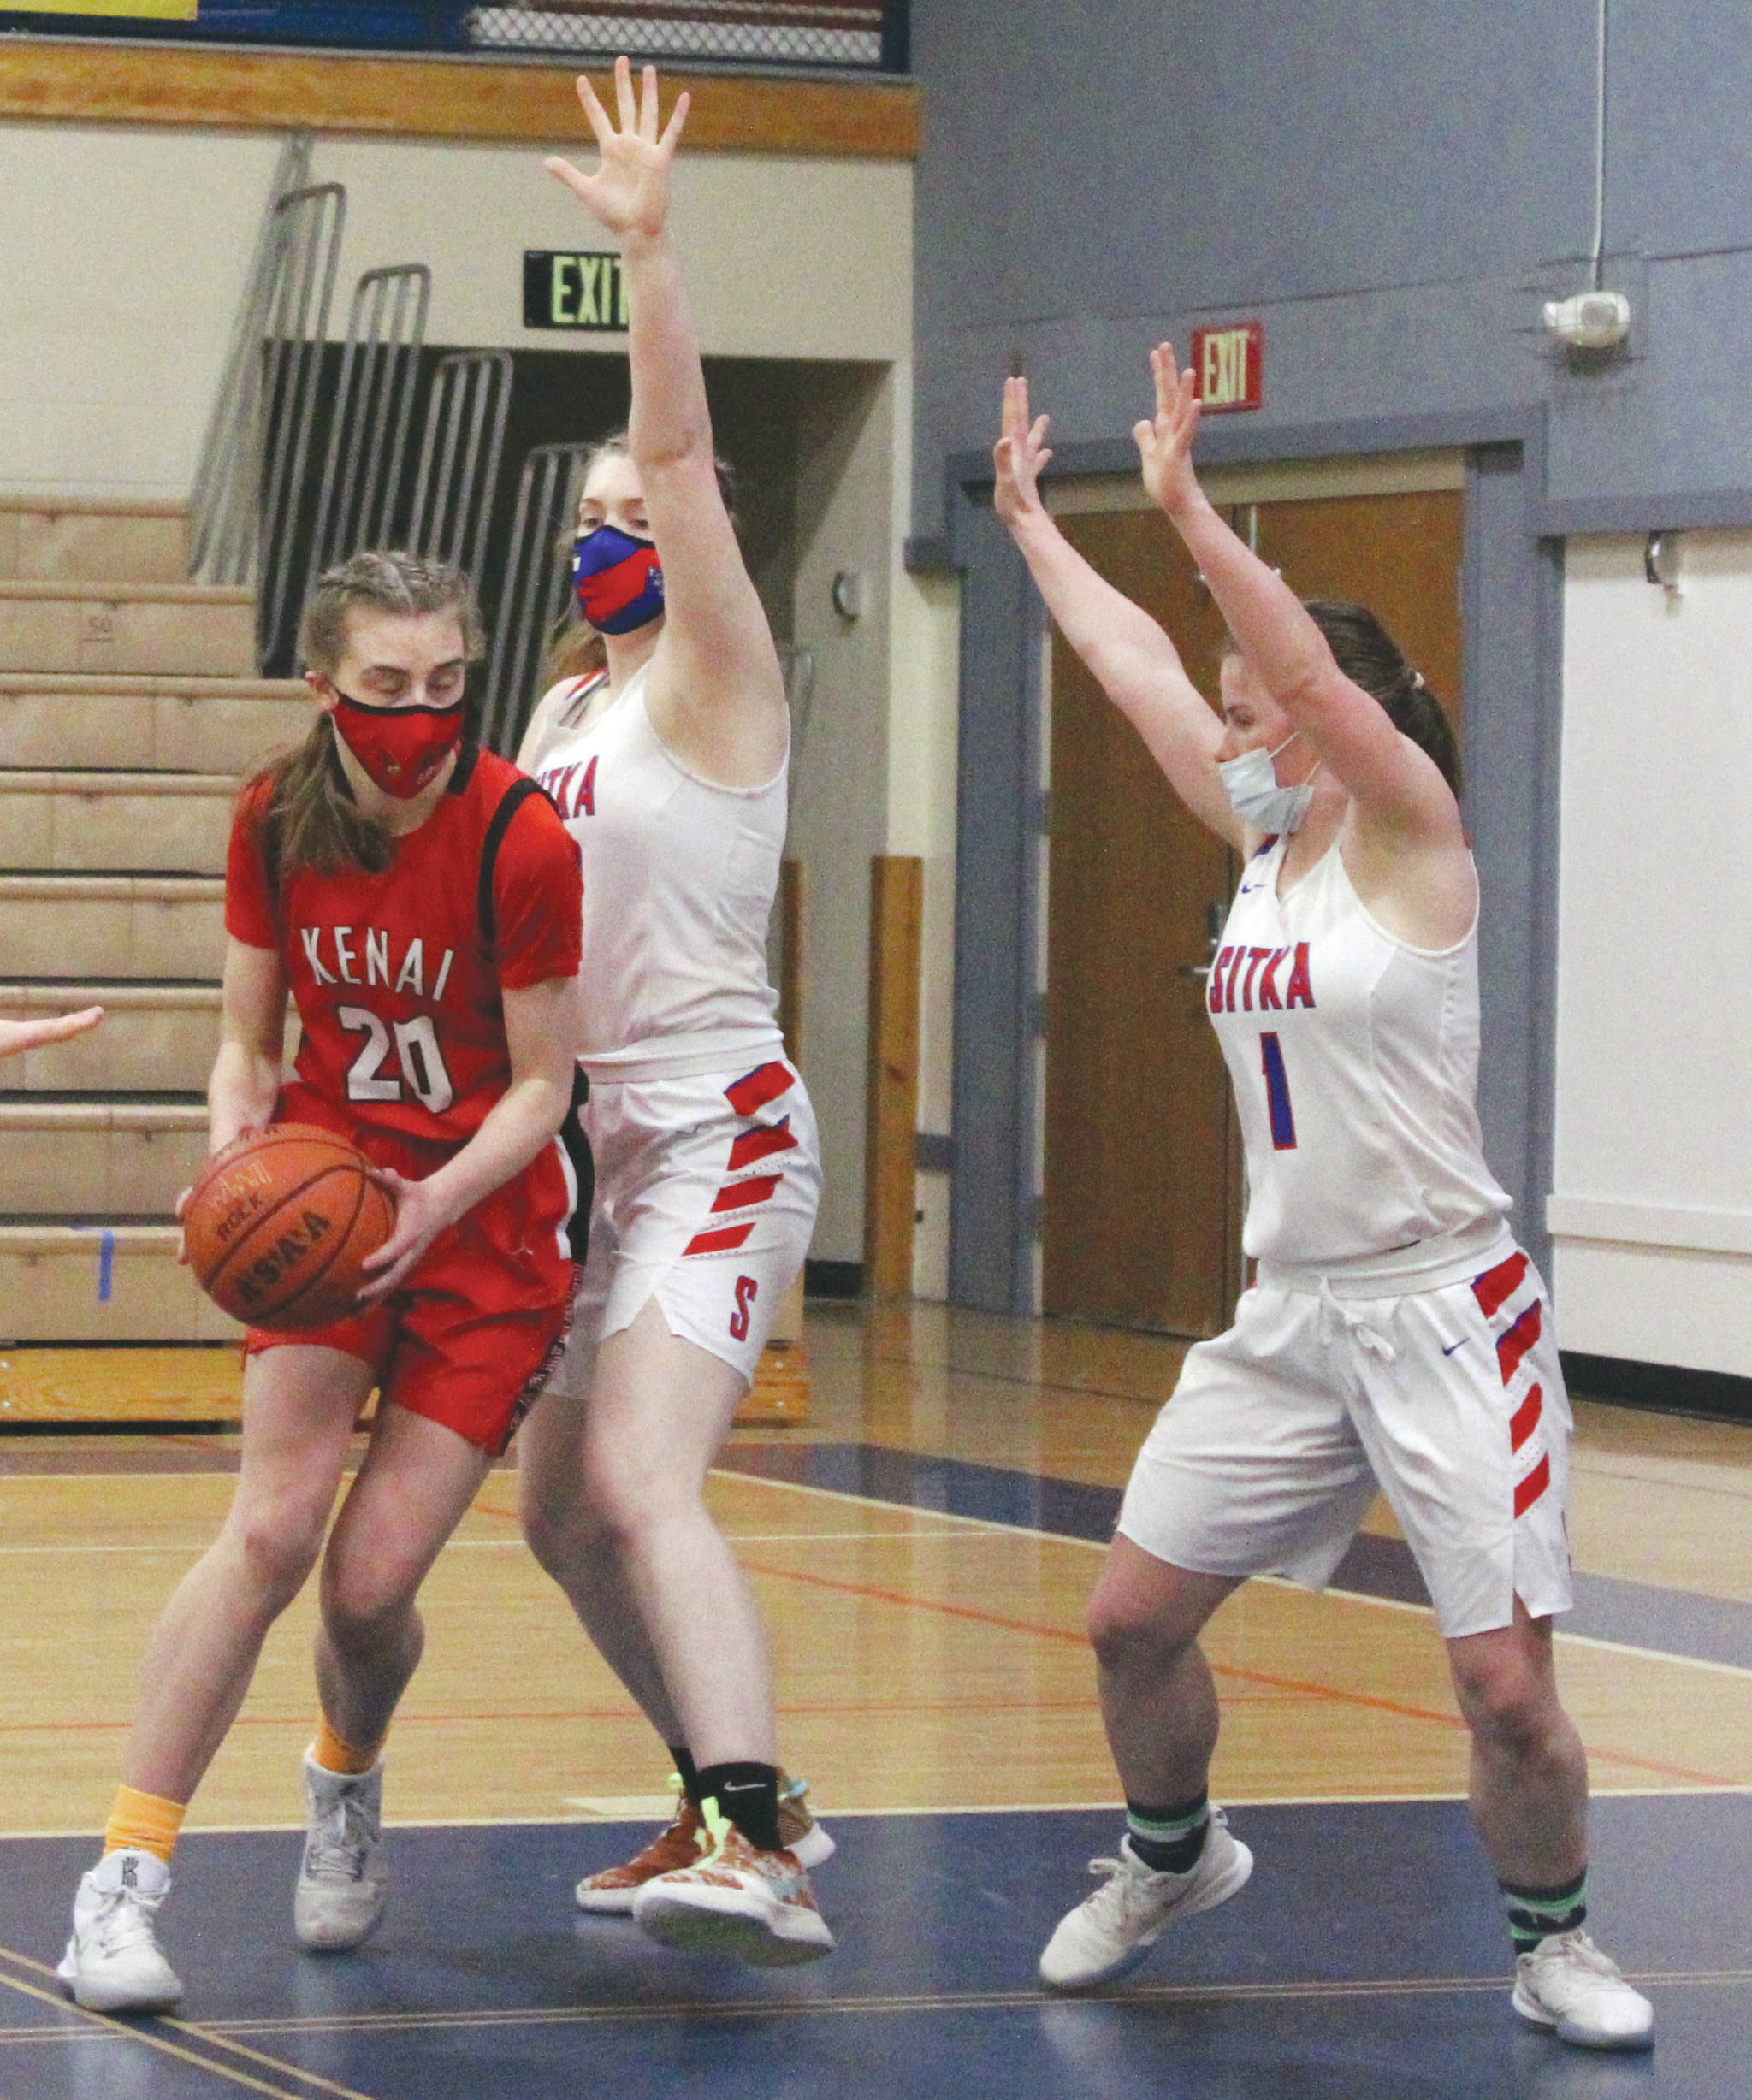 Kenai Central’s Erin Koziczkowski posts up on Sitka on Thursday, March 25, 2021, at the Class 3A girls state tournament at Palmer Middle School in Palmer, Alaska. (Photo by Tim Rockey/Frontiersman)